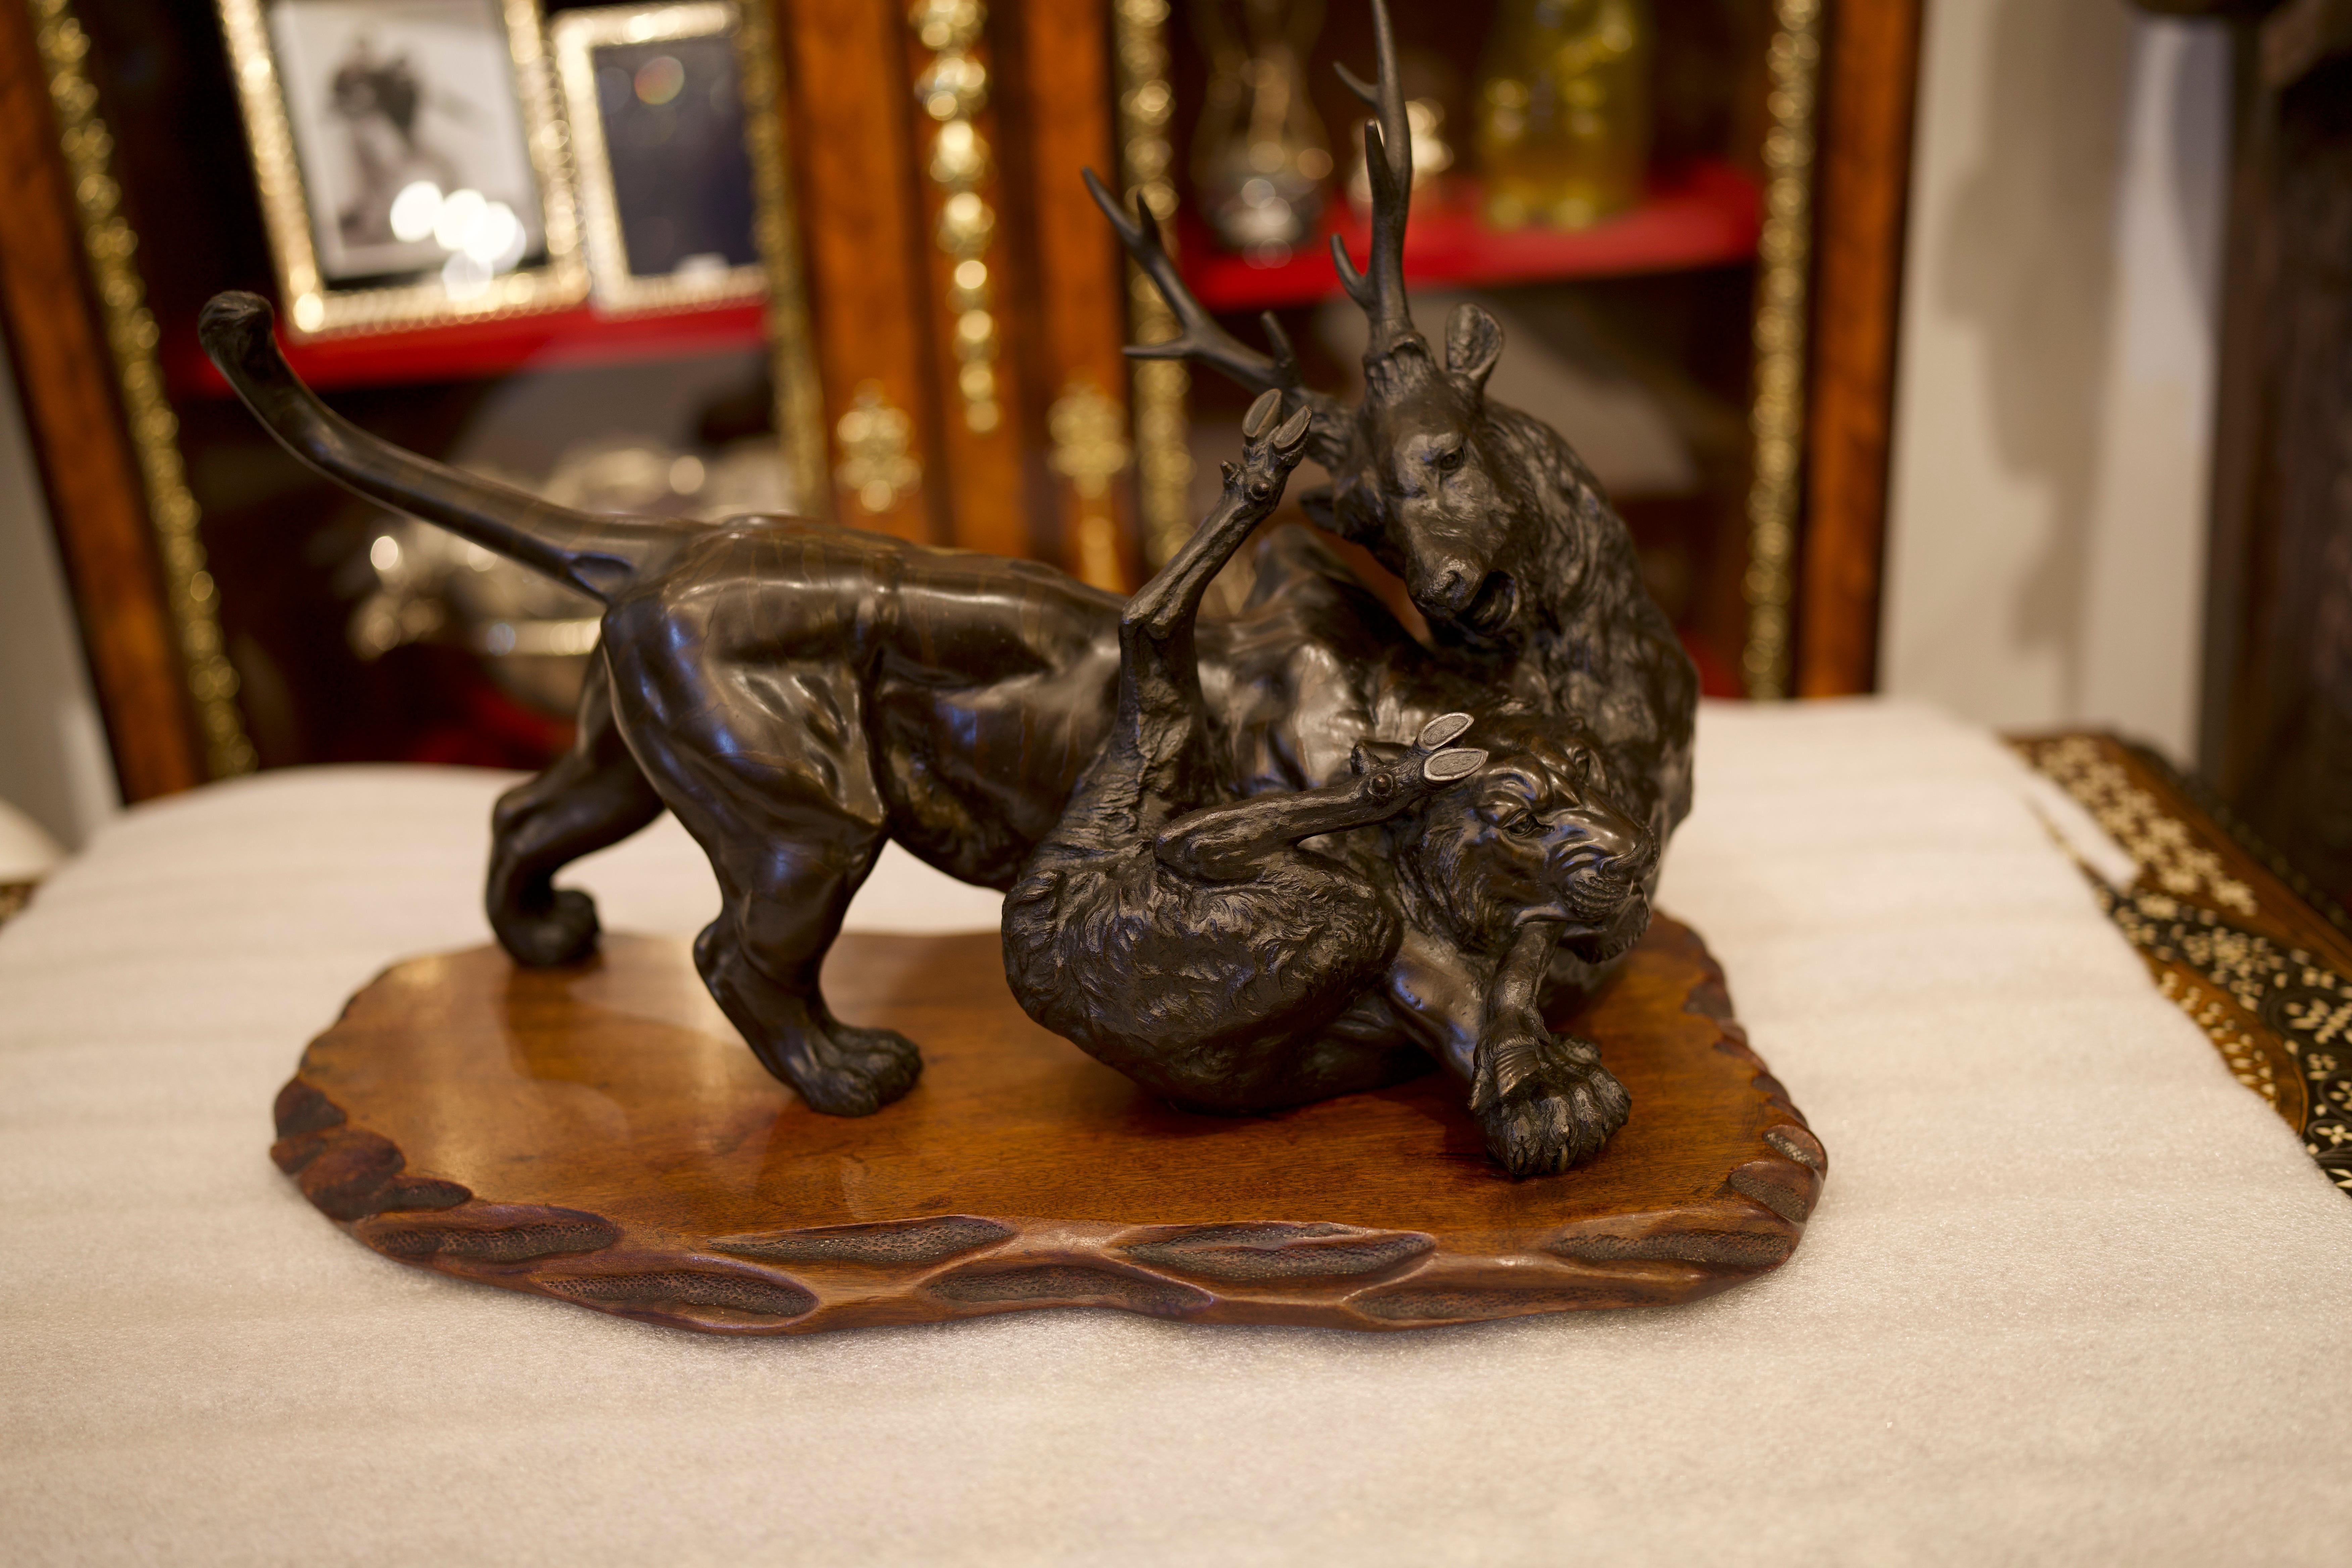 A stunning Japanese Meiji Bronze on Hardwood Base Tiger/Antelope, 19th Century. The tiger presents strength, vitality, and growth. The artist has captured the virtues beautifully in this piece, resembling a strong and powerful visual.